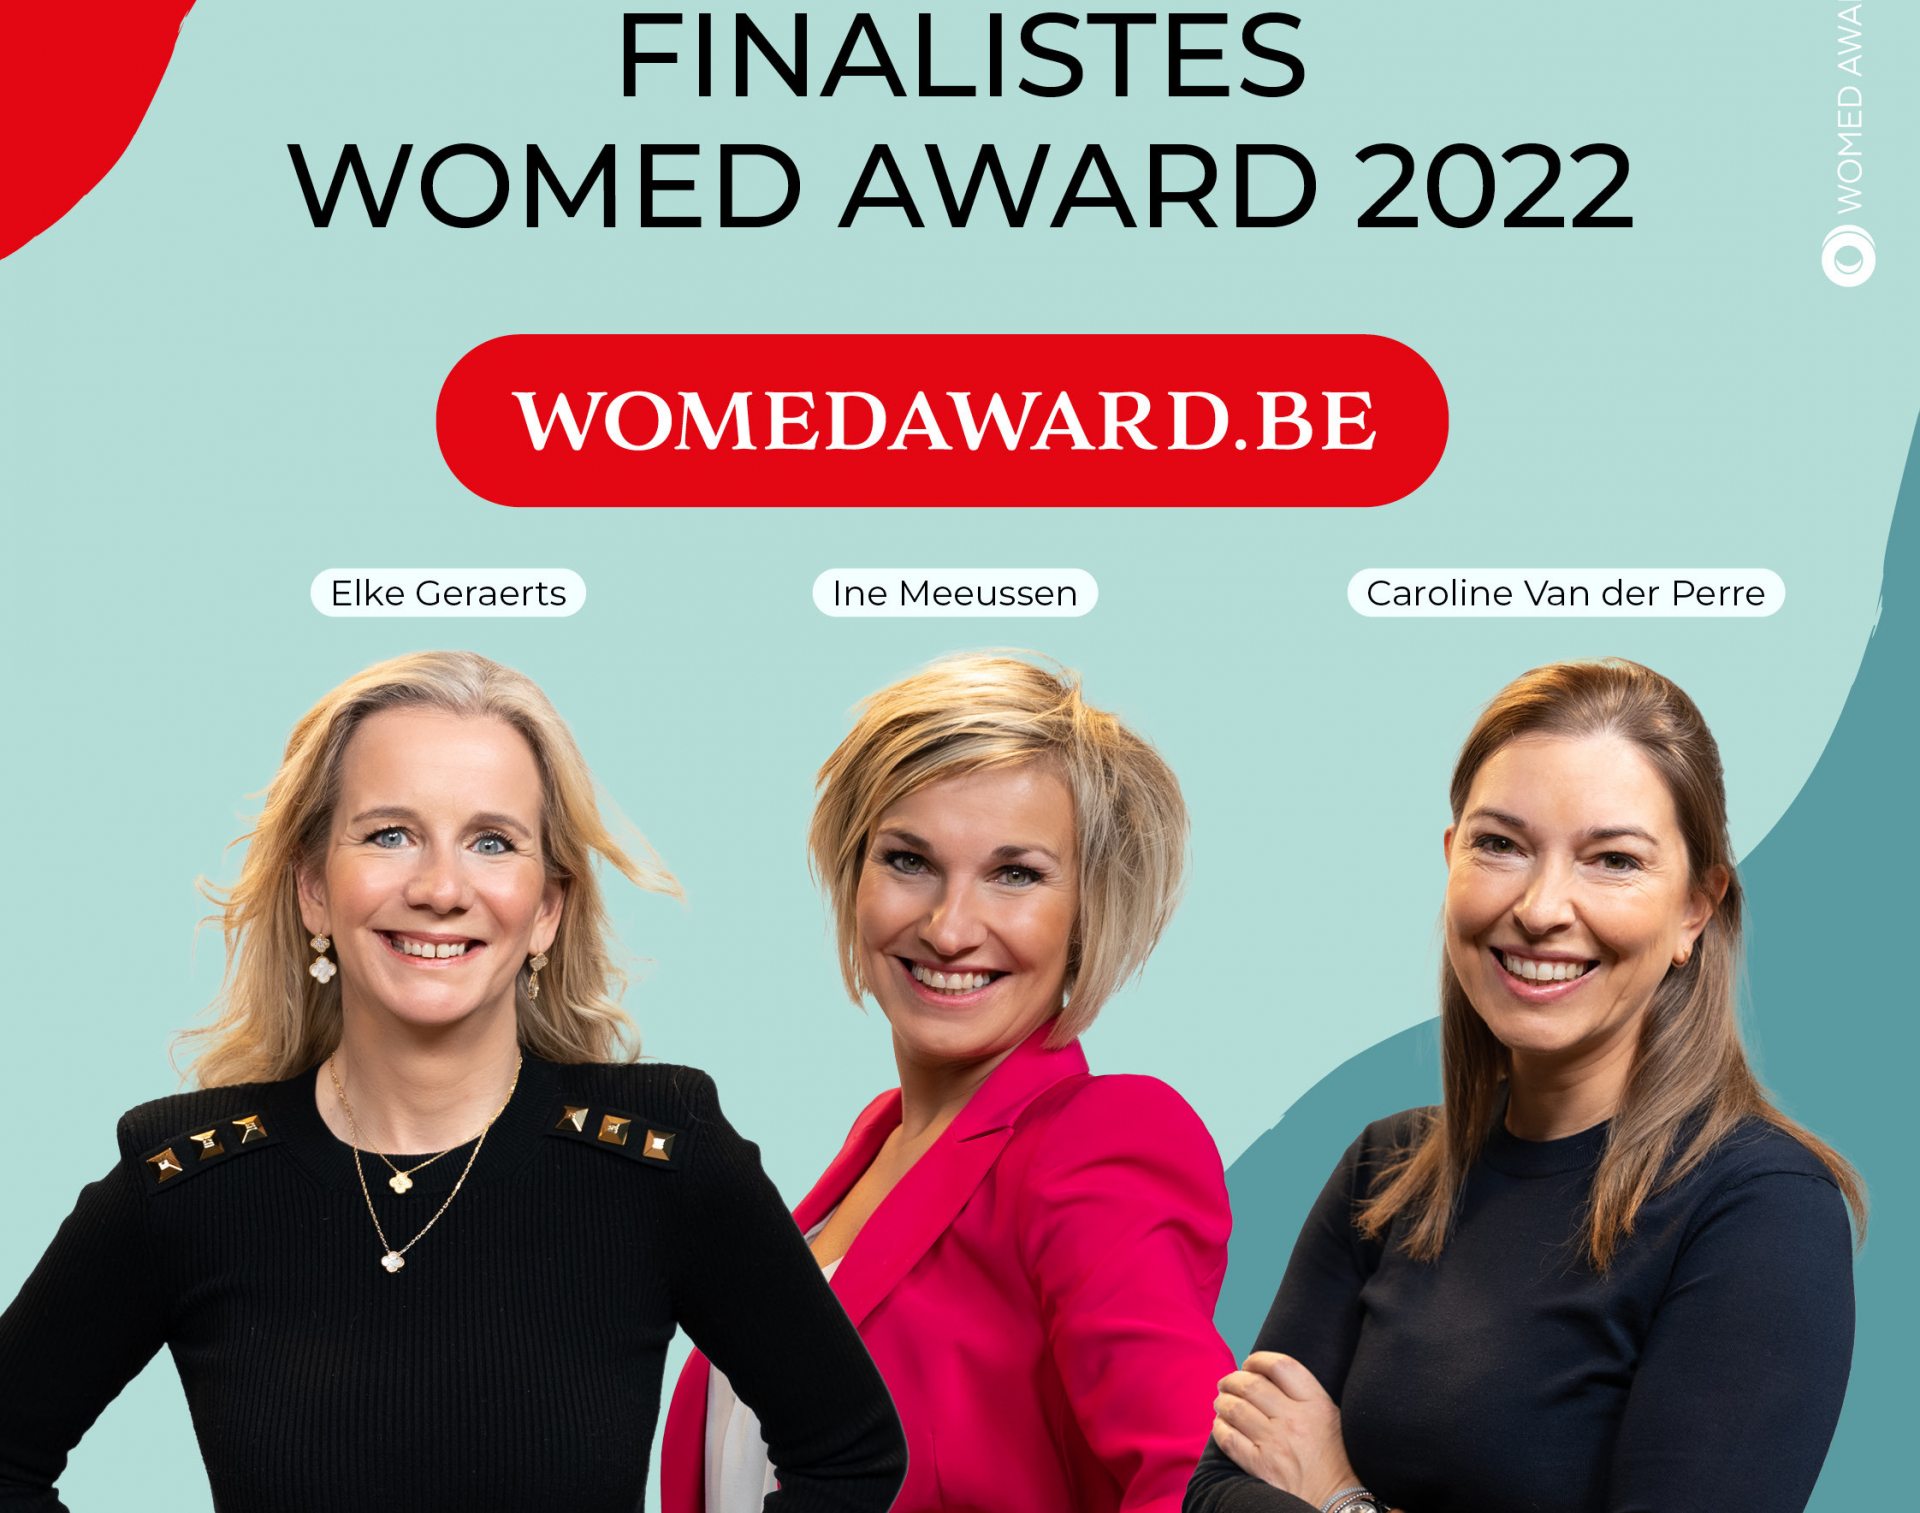 Insta finalistes WOMED 2022